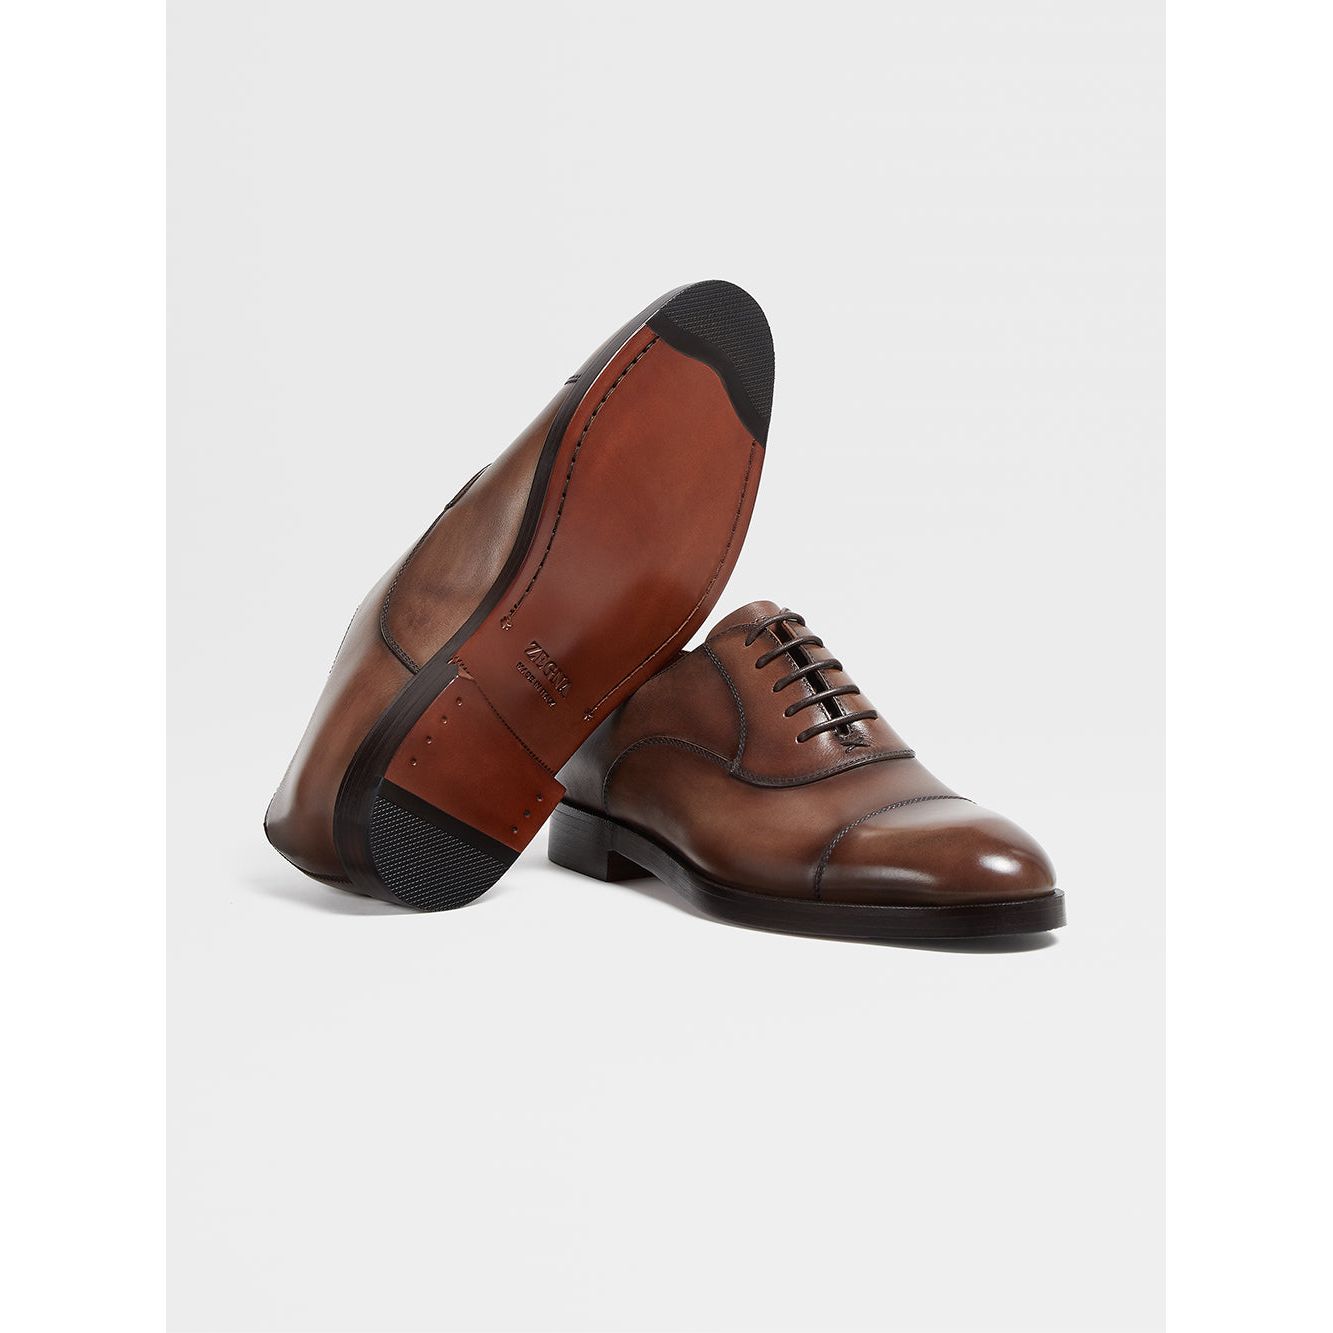 LIGHT BROWN LEATHER TORINO OXFORD SHOES - Yooto